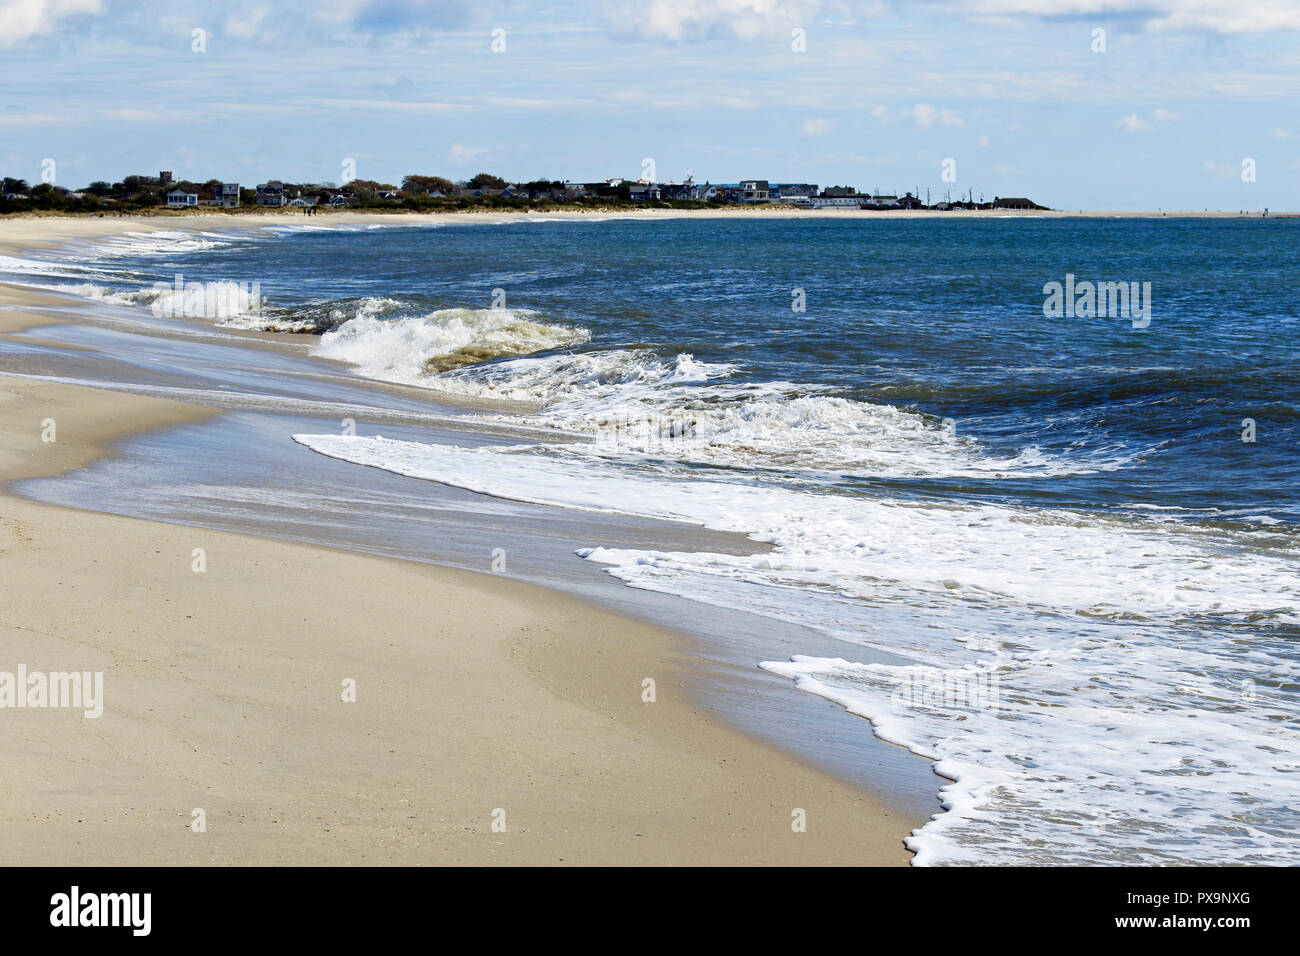 The Atlantic Ocean dazzling in the sunlight, Cape May, New Jersey Stock Photo